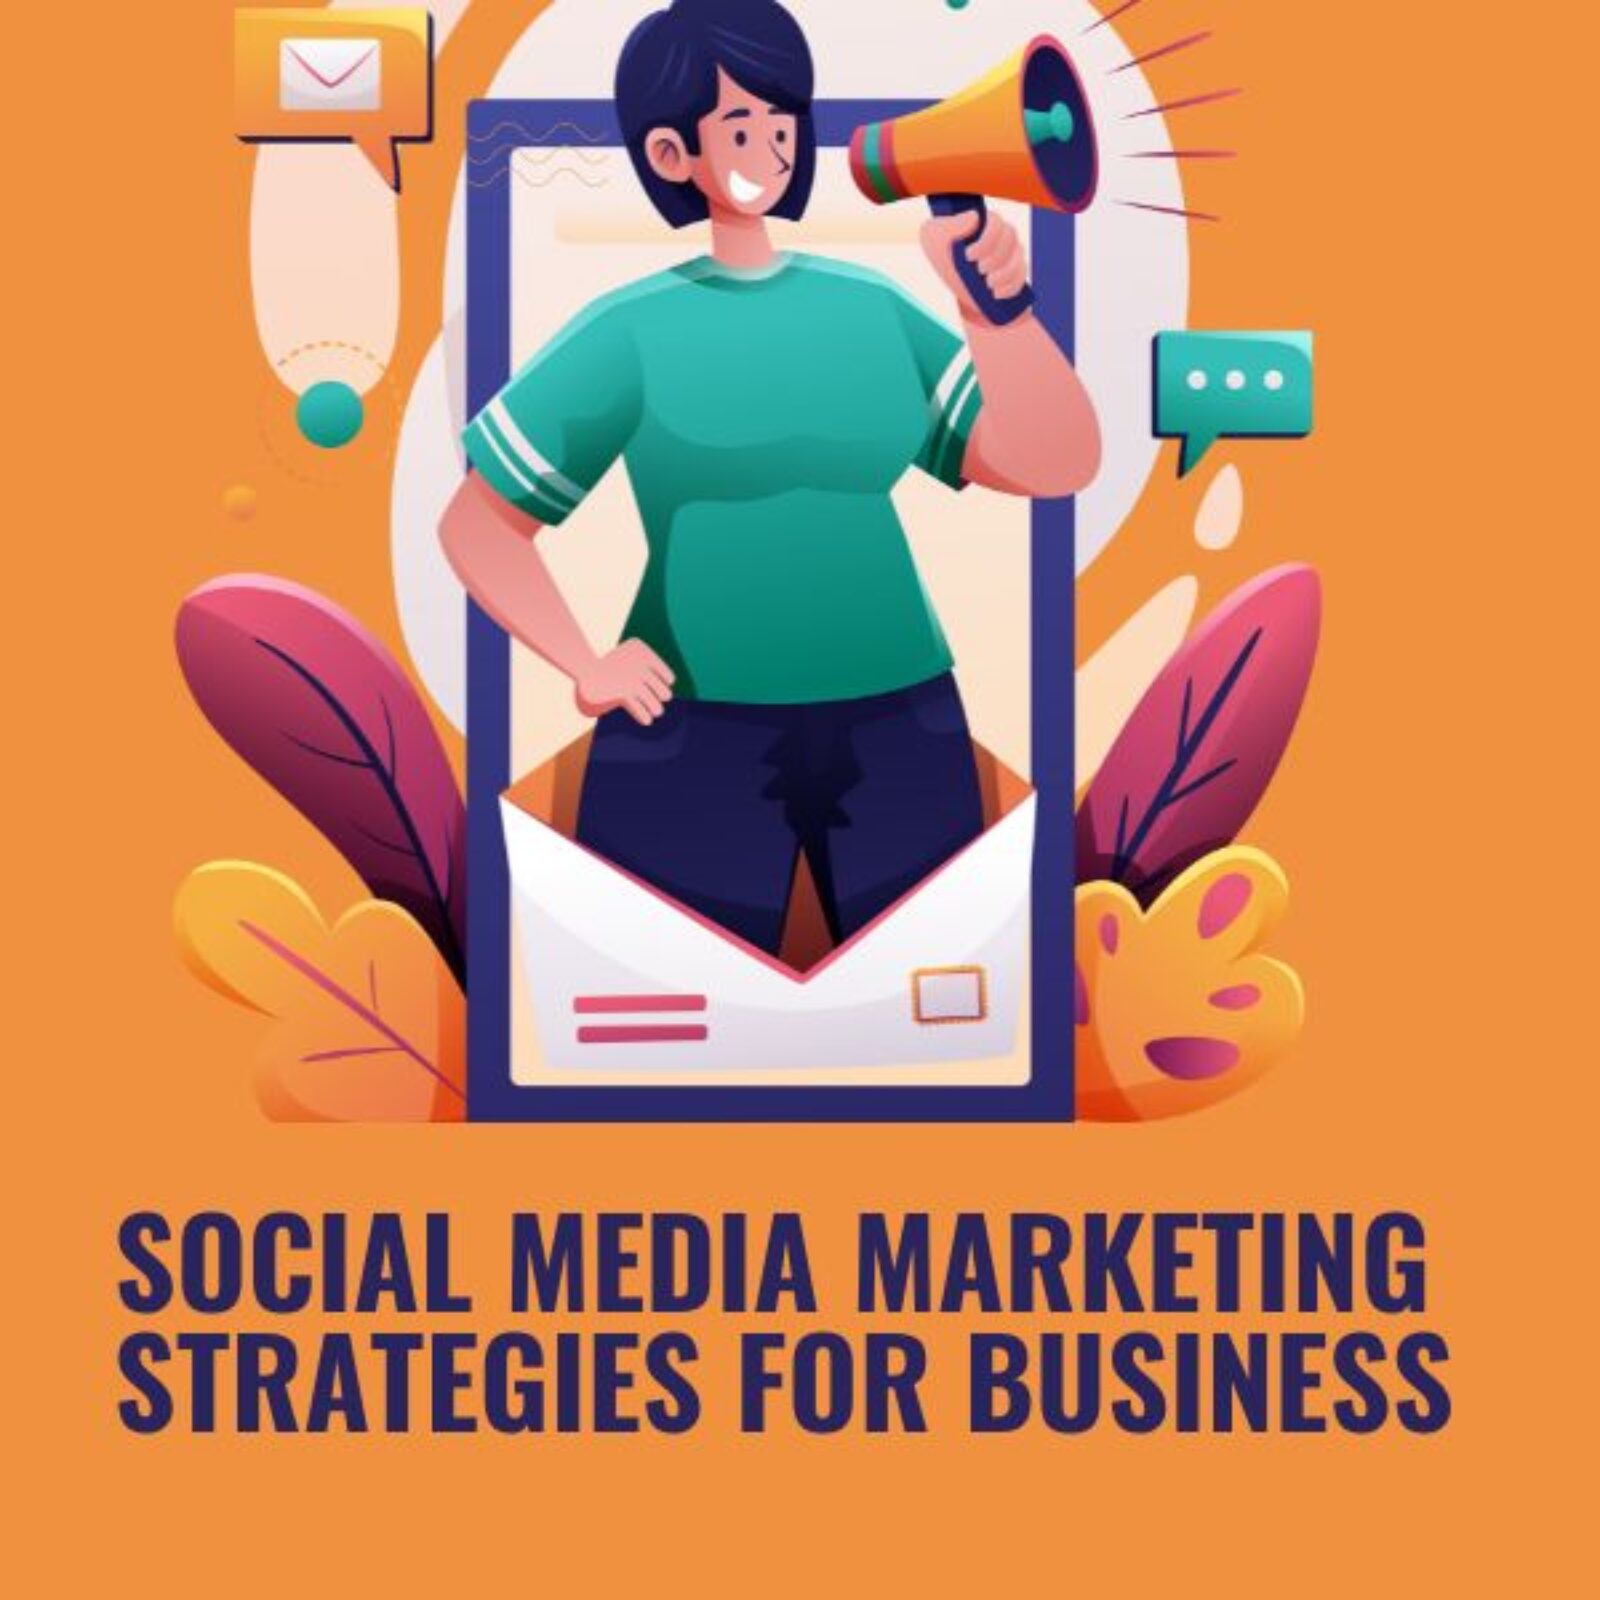 How to create a social media strategy for business